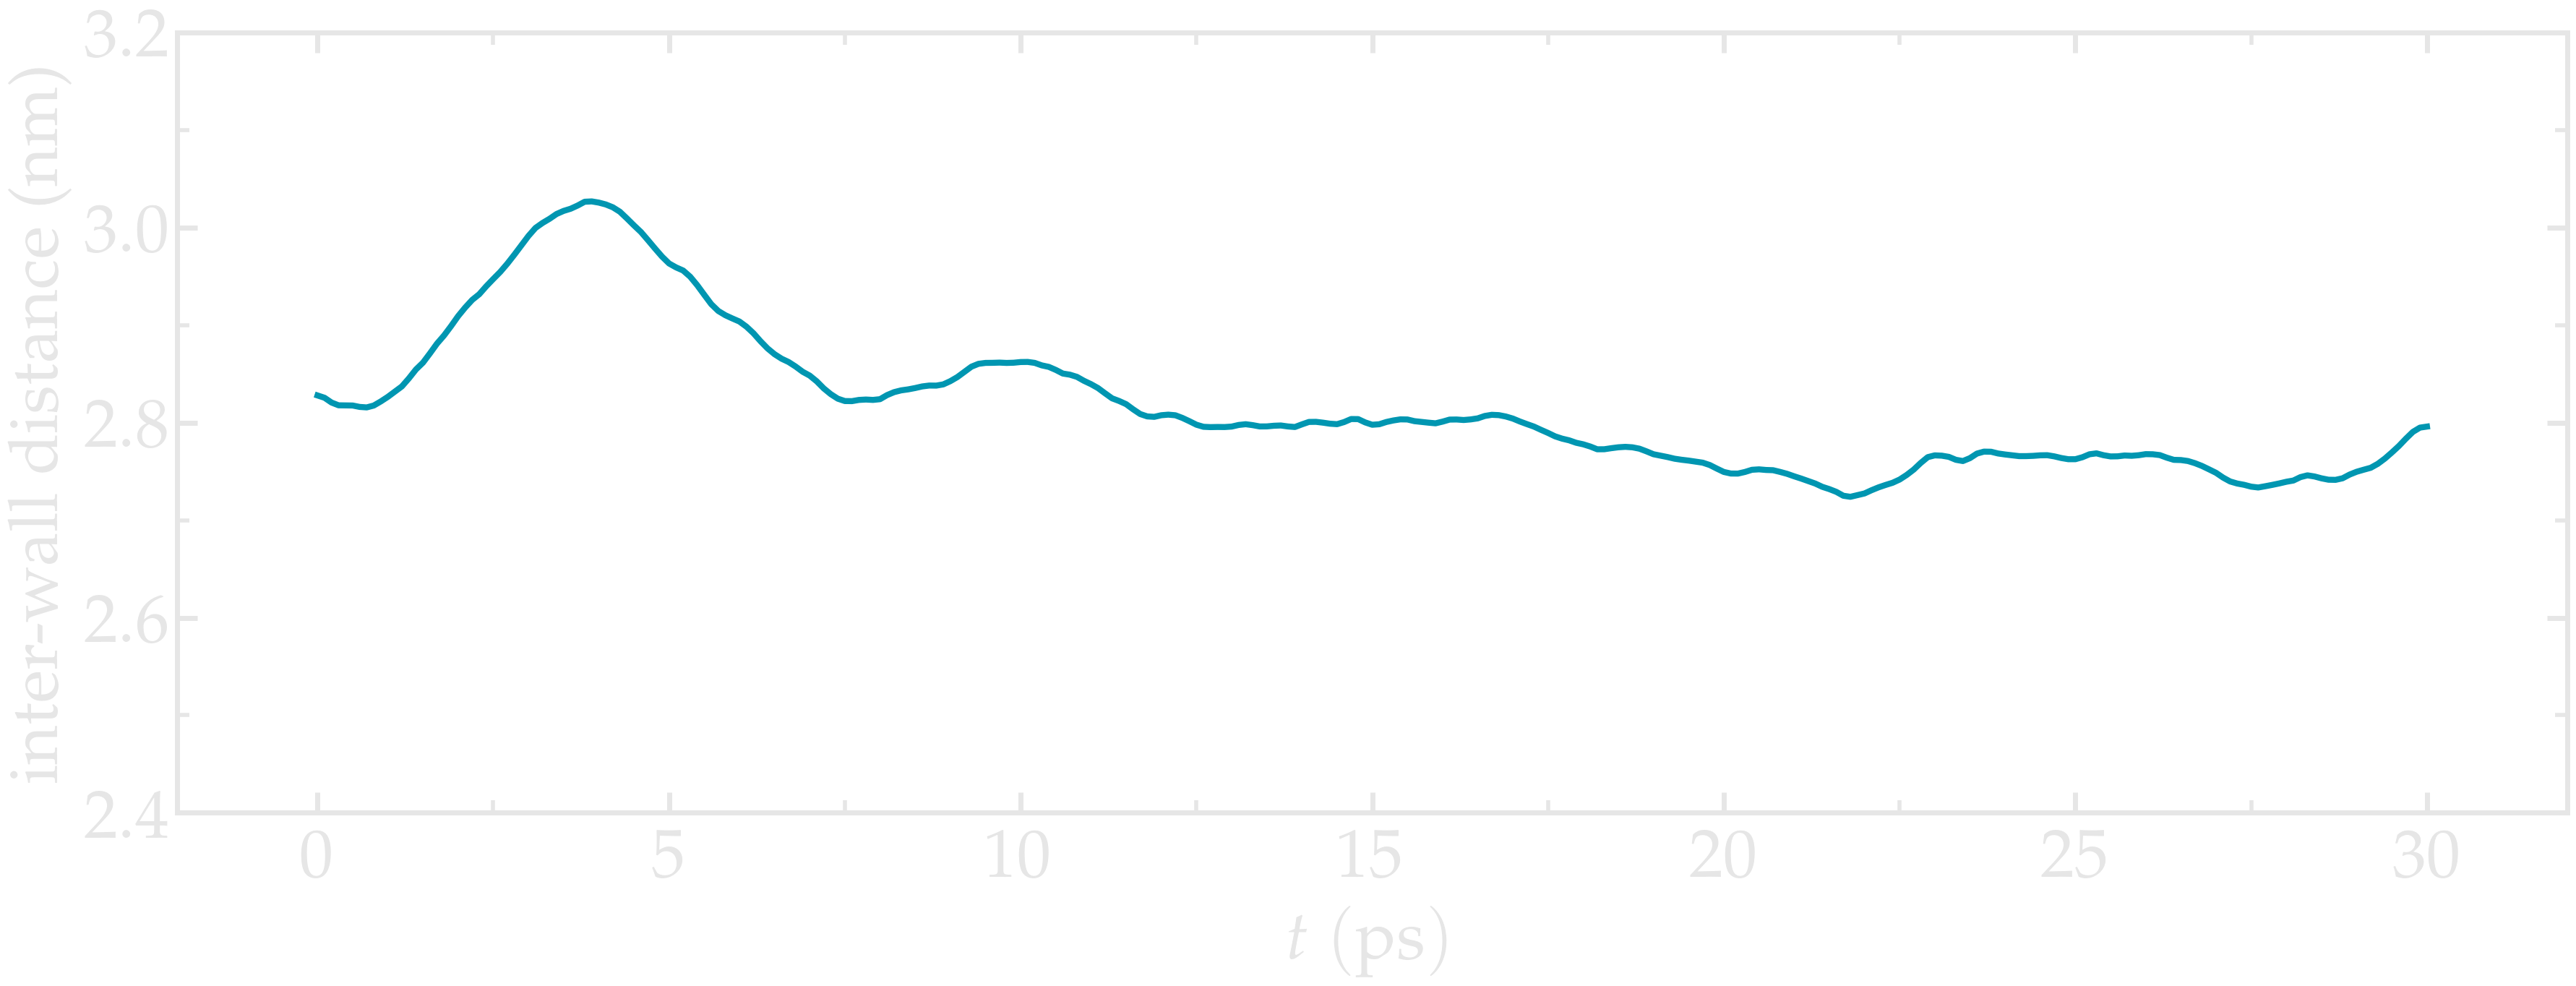 Plot showing the distance between the walls as a function of time.